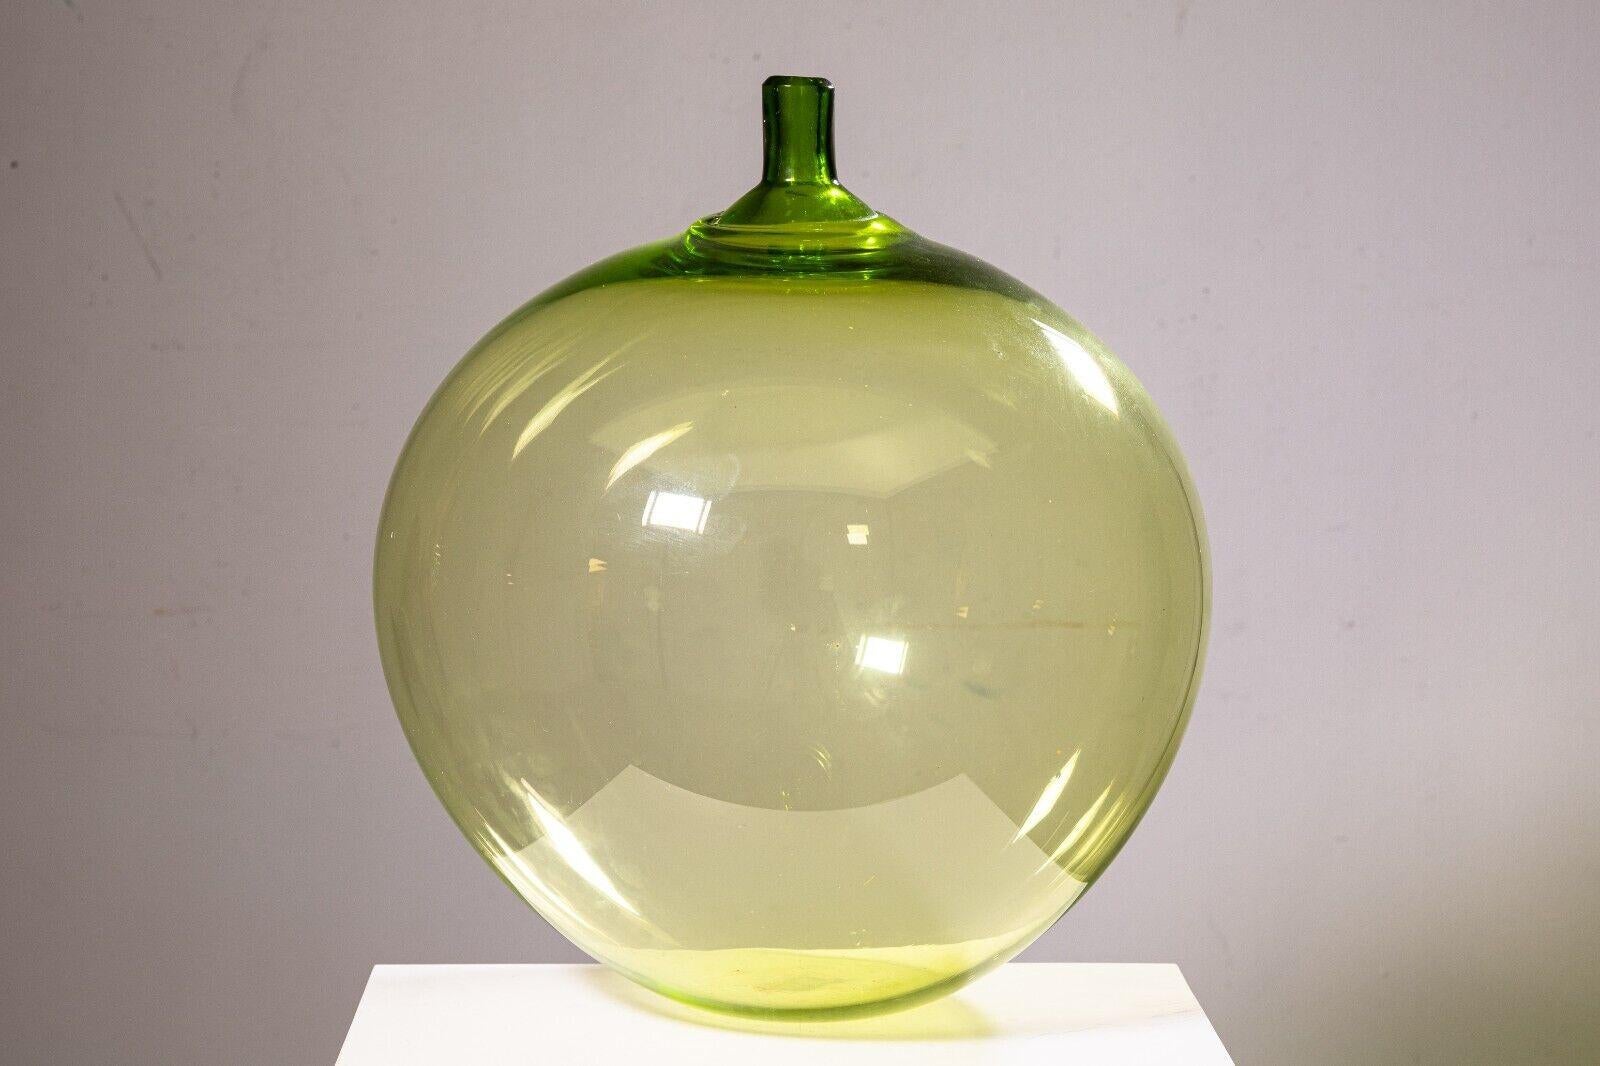 An Orrefors green apple vase by Ingeborg Lundin. This gorgeous glass vase is designed by Swedish designer Ingeborg Lundin for Orrefors, a designer glassworks company out of Smaland, Sweden. This piece was designed and manufactured in the 1950s. It